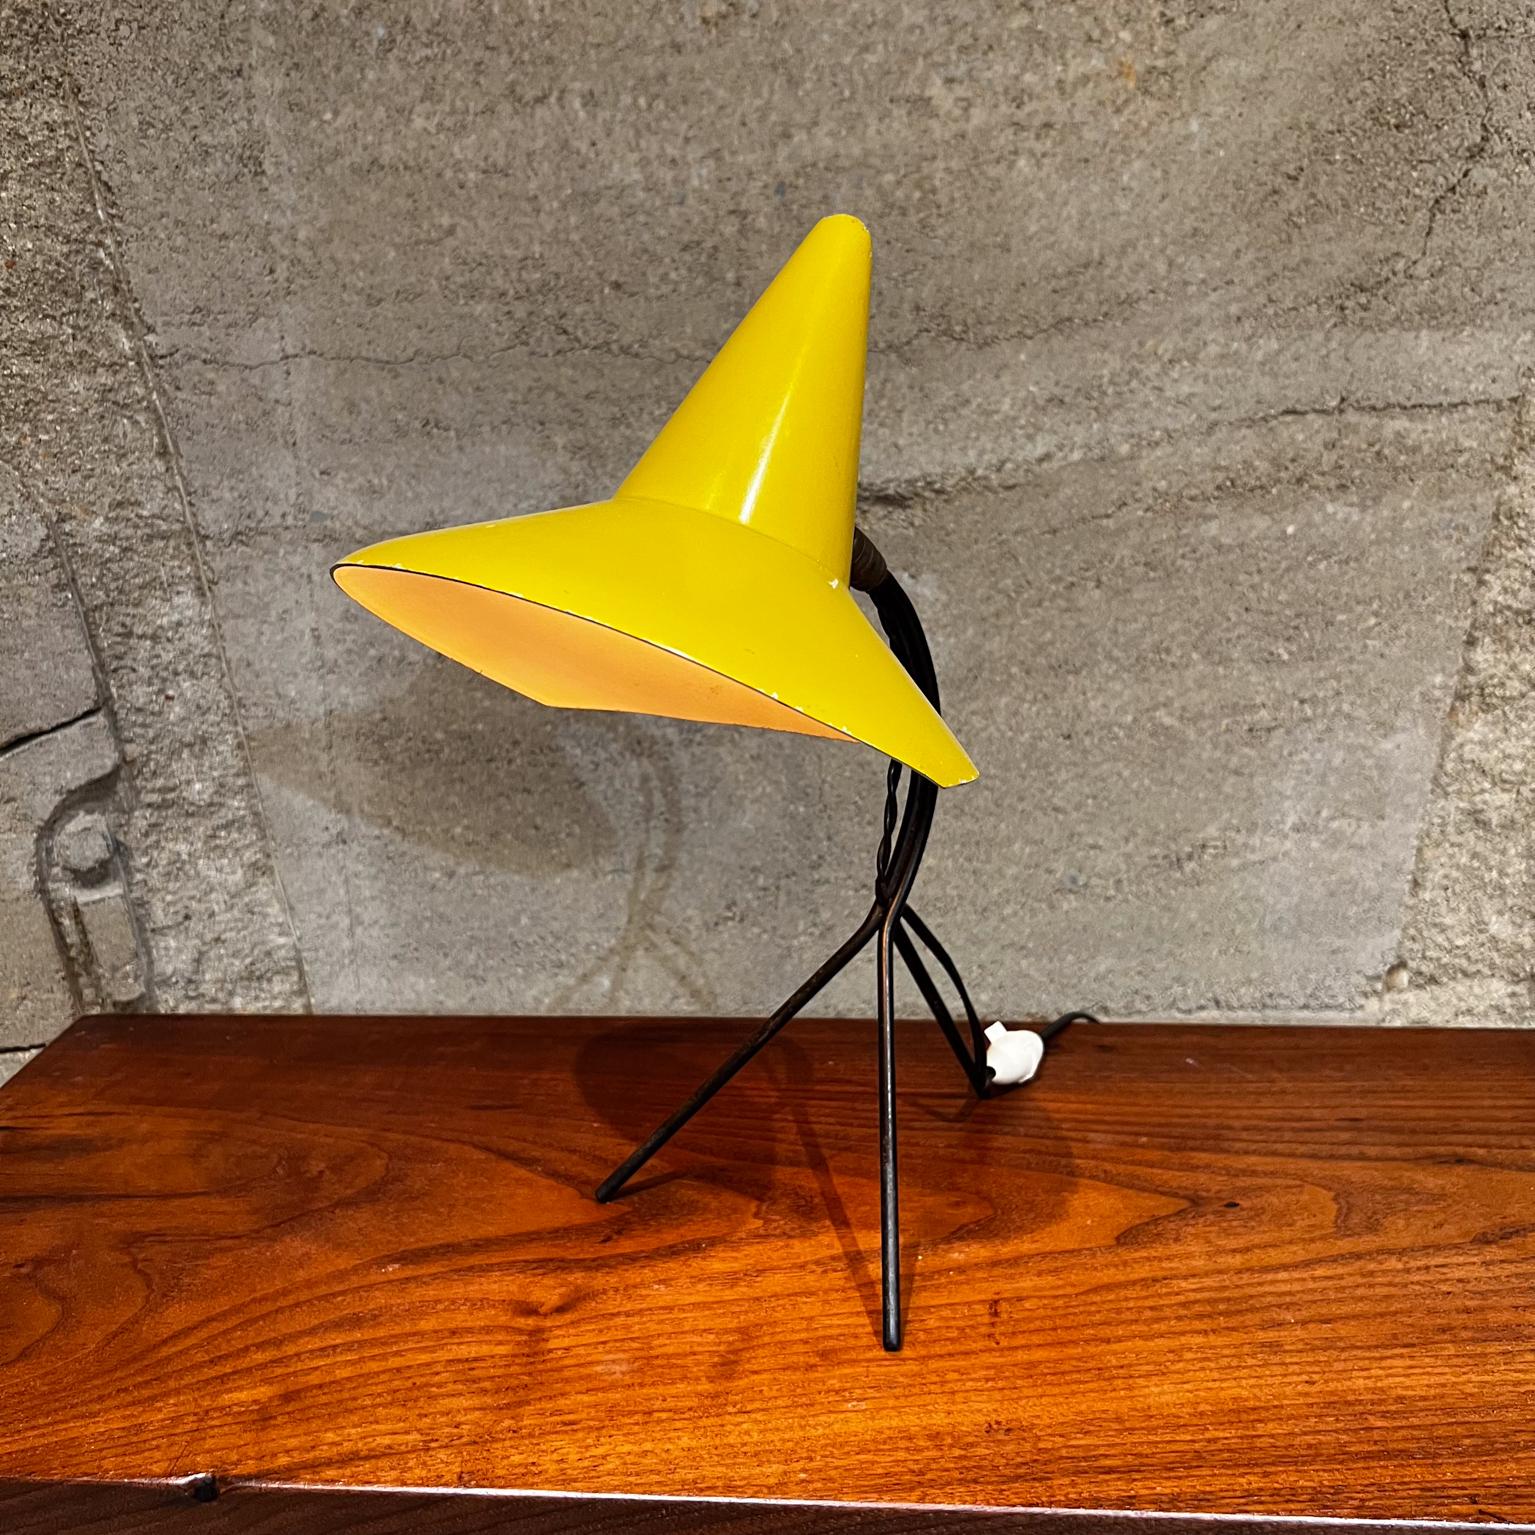 1950s Yellow Desk Table Lamp Modern Style Guariche and Lacroix France
Unmarked attributed to Pierre Guariche and Jean Boris Lacroix France
14.5 h x 11 d x 9 w
Preowned vintage condition
Refer to all images.